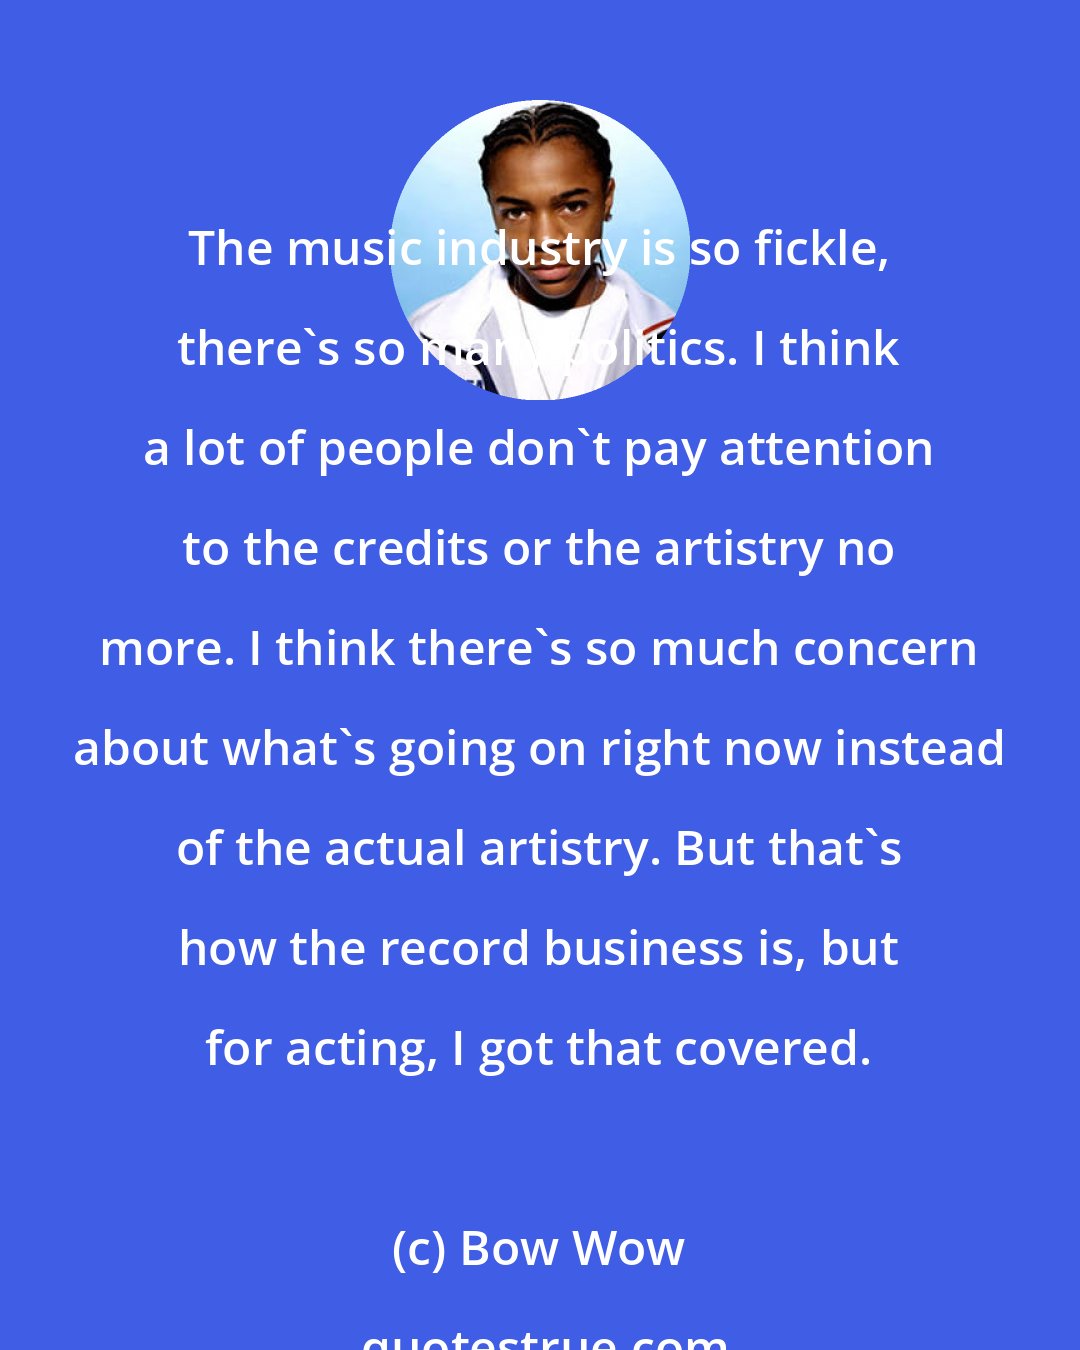 Bow Wow: The music industry is so fickle, there's so many politics. I think a lot of people don't pay attention to the credits or the artistry no more. I think there's so much concern about what's going on right now instead of the actual artistry. But that's how the record business is, but for acting, I got that covered.